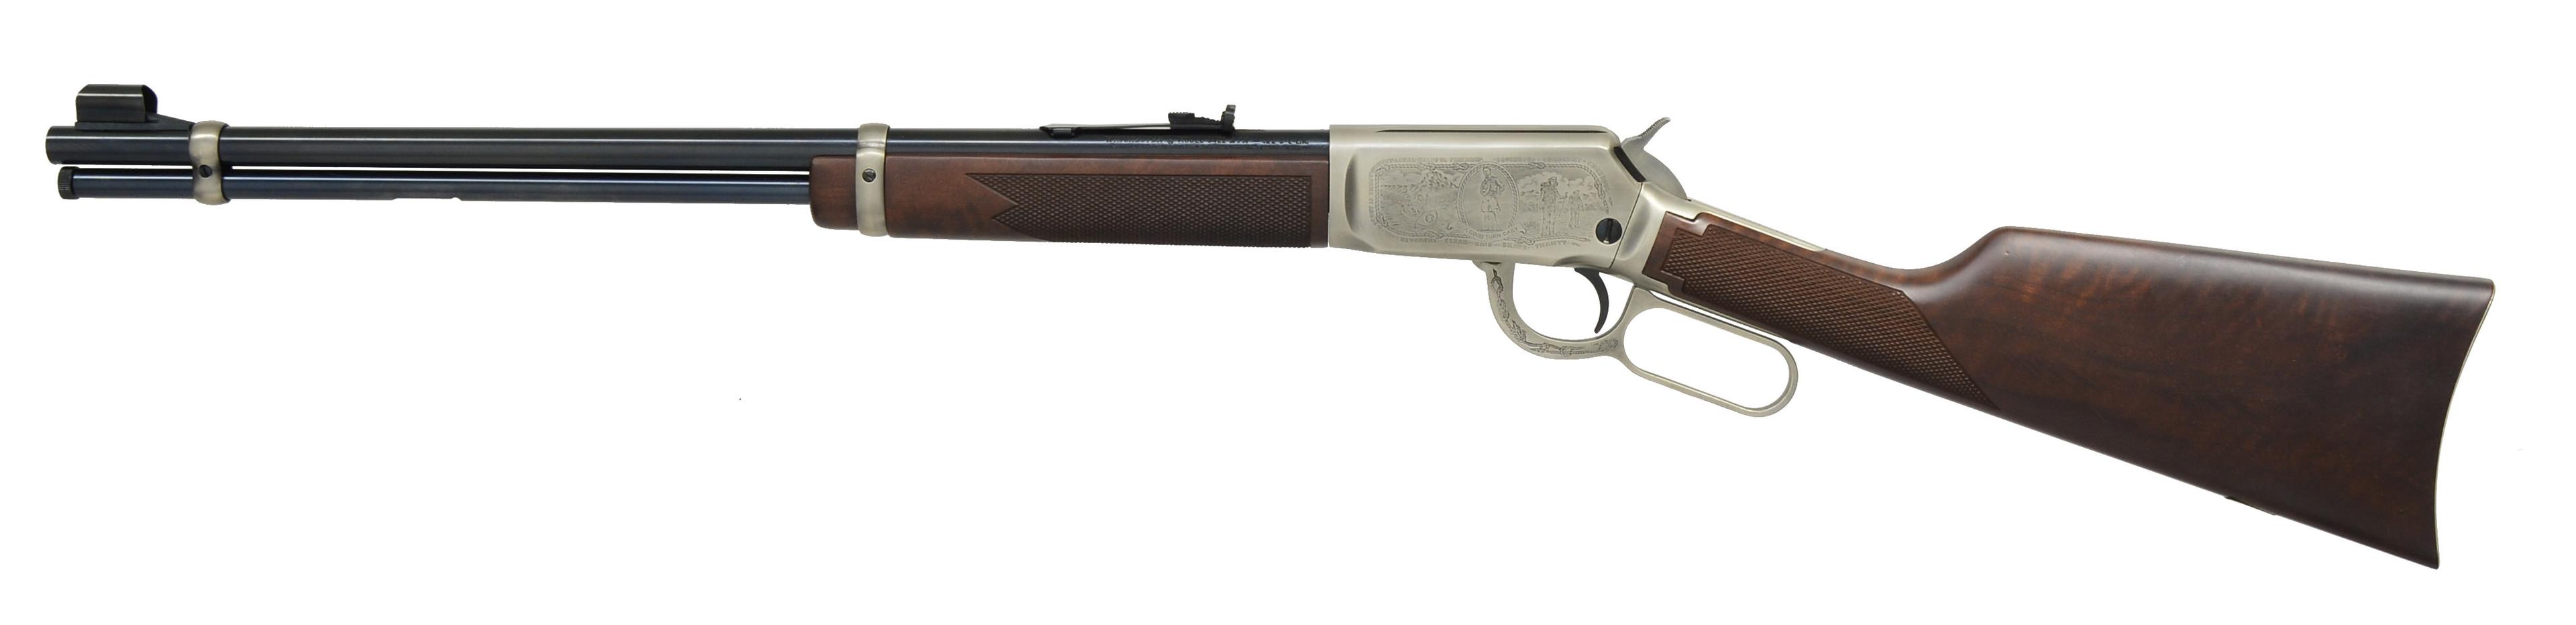 WINCHESTER 9422 XTR BOY SCOUTS OF AMERICA